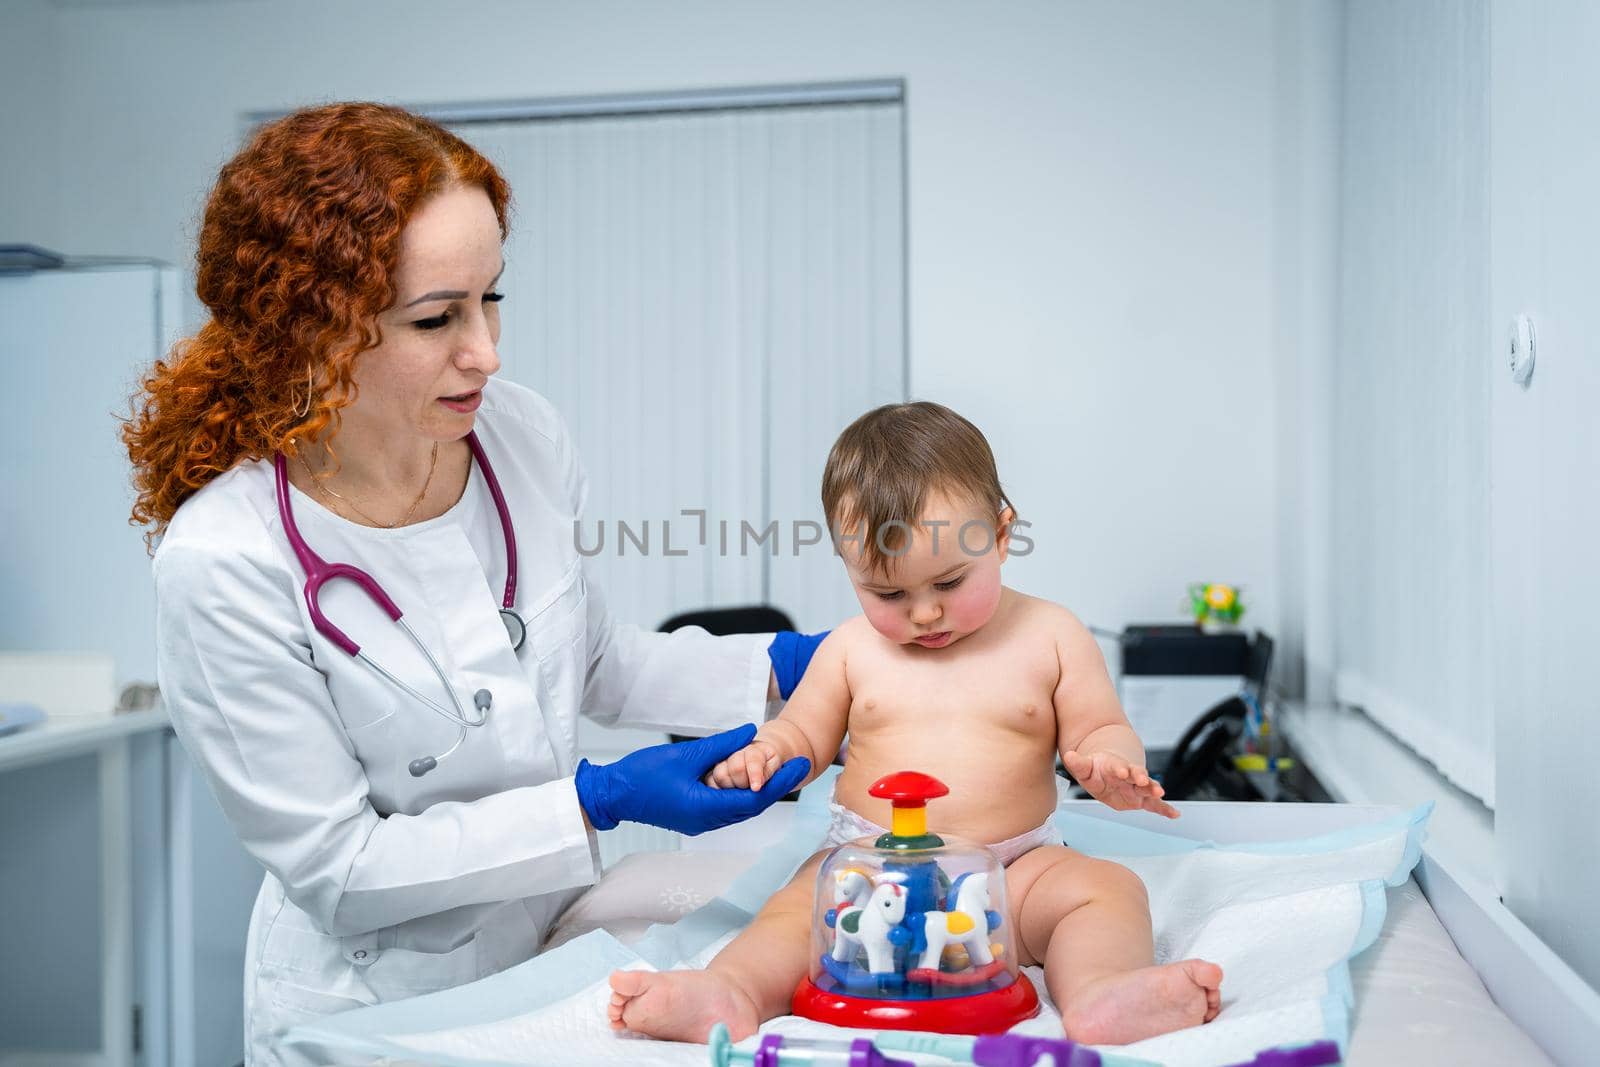 Pediatrician doctor concept. Children medical care. One year old baby girl examined by female pediatrician in clinic office. Child visiting doctor for health check-up. Doctor examine little patient by Tomashevska